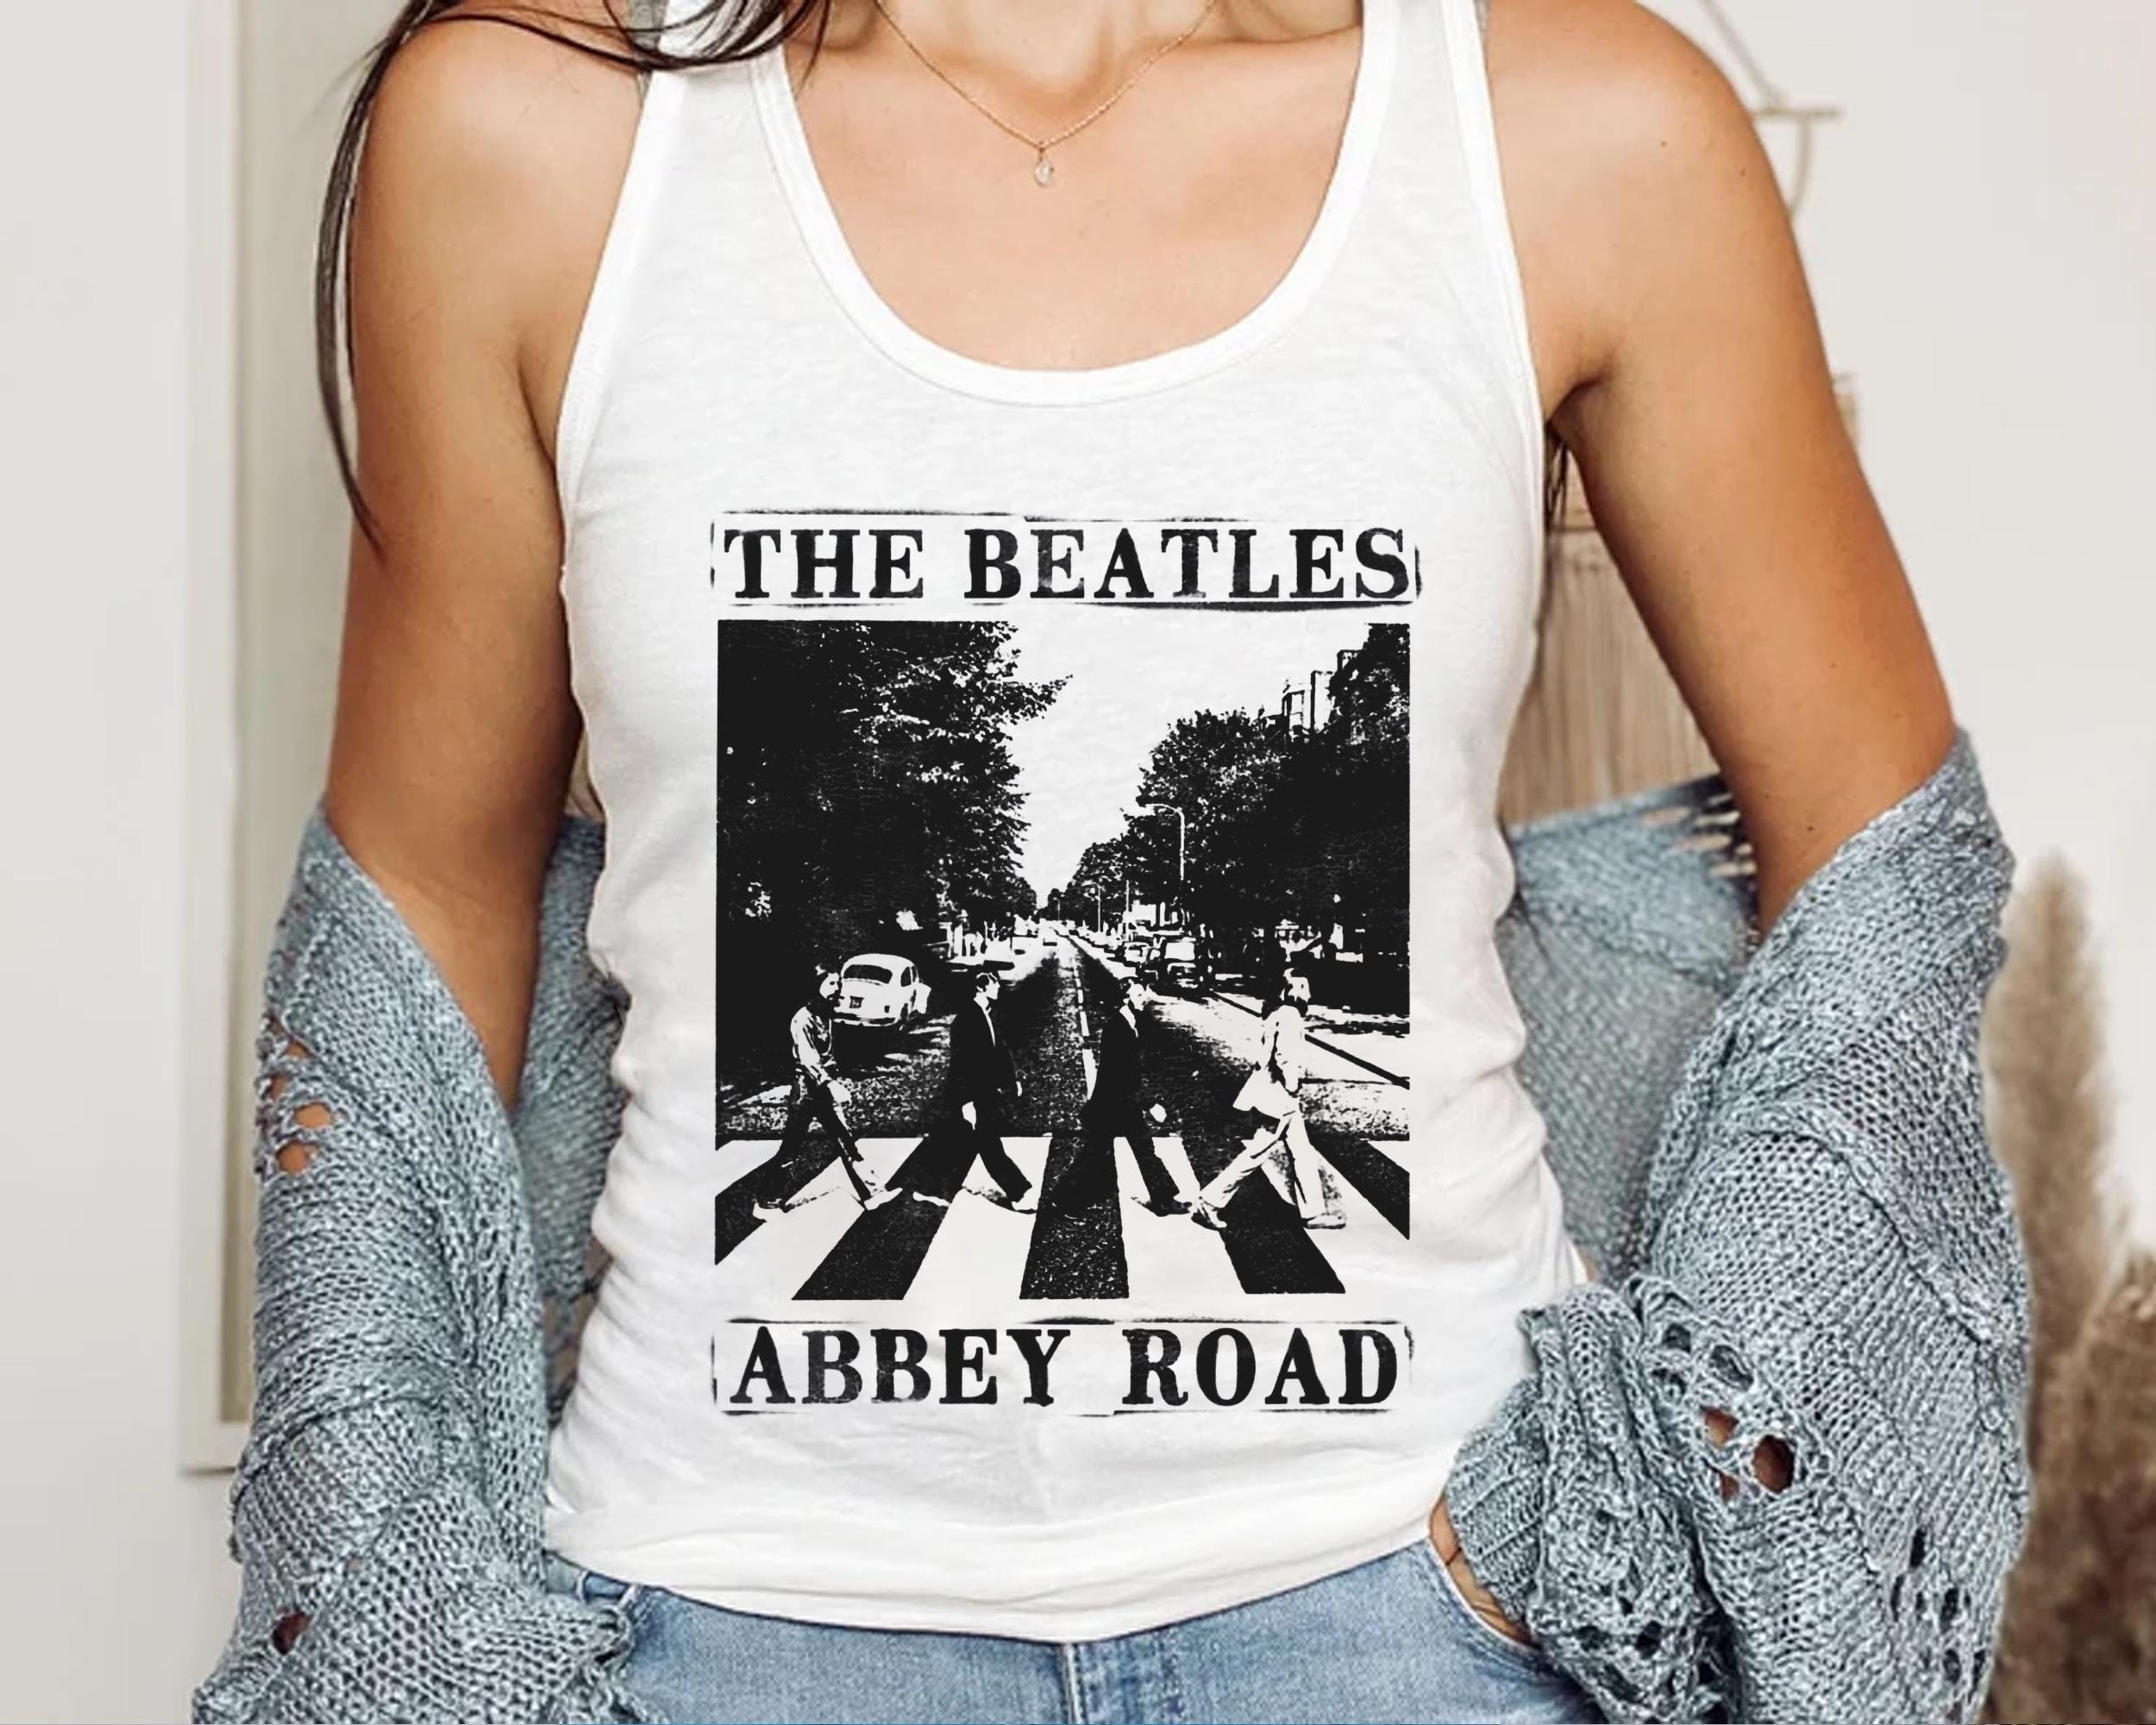 Abbey Road Shirt the Holiday Tank Funny Music Beatles Gift Friends Family Lover Top - Fan Party Etsy Tees T-shirts